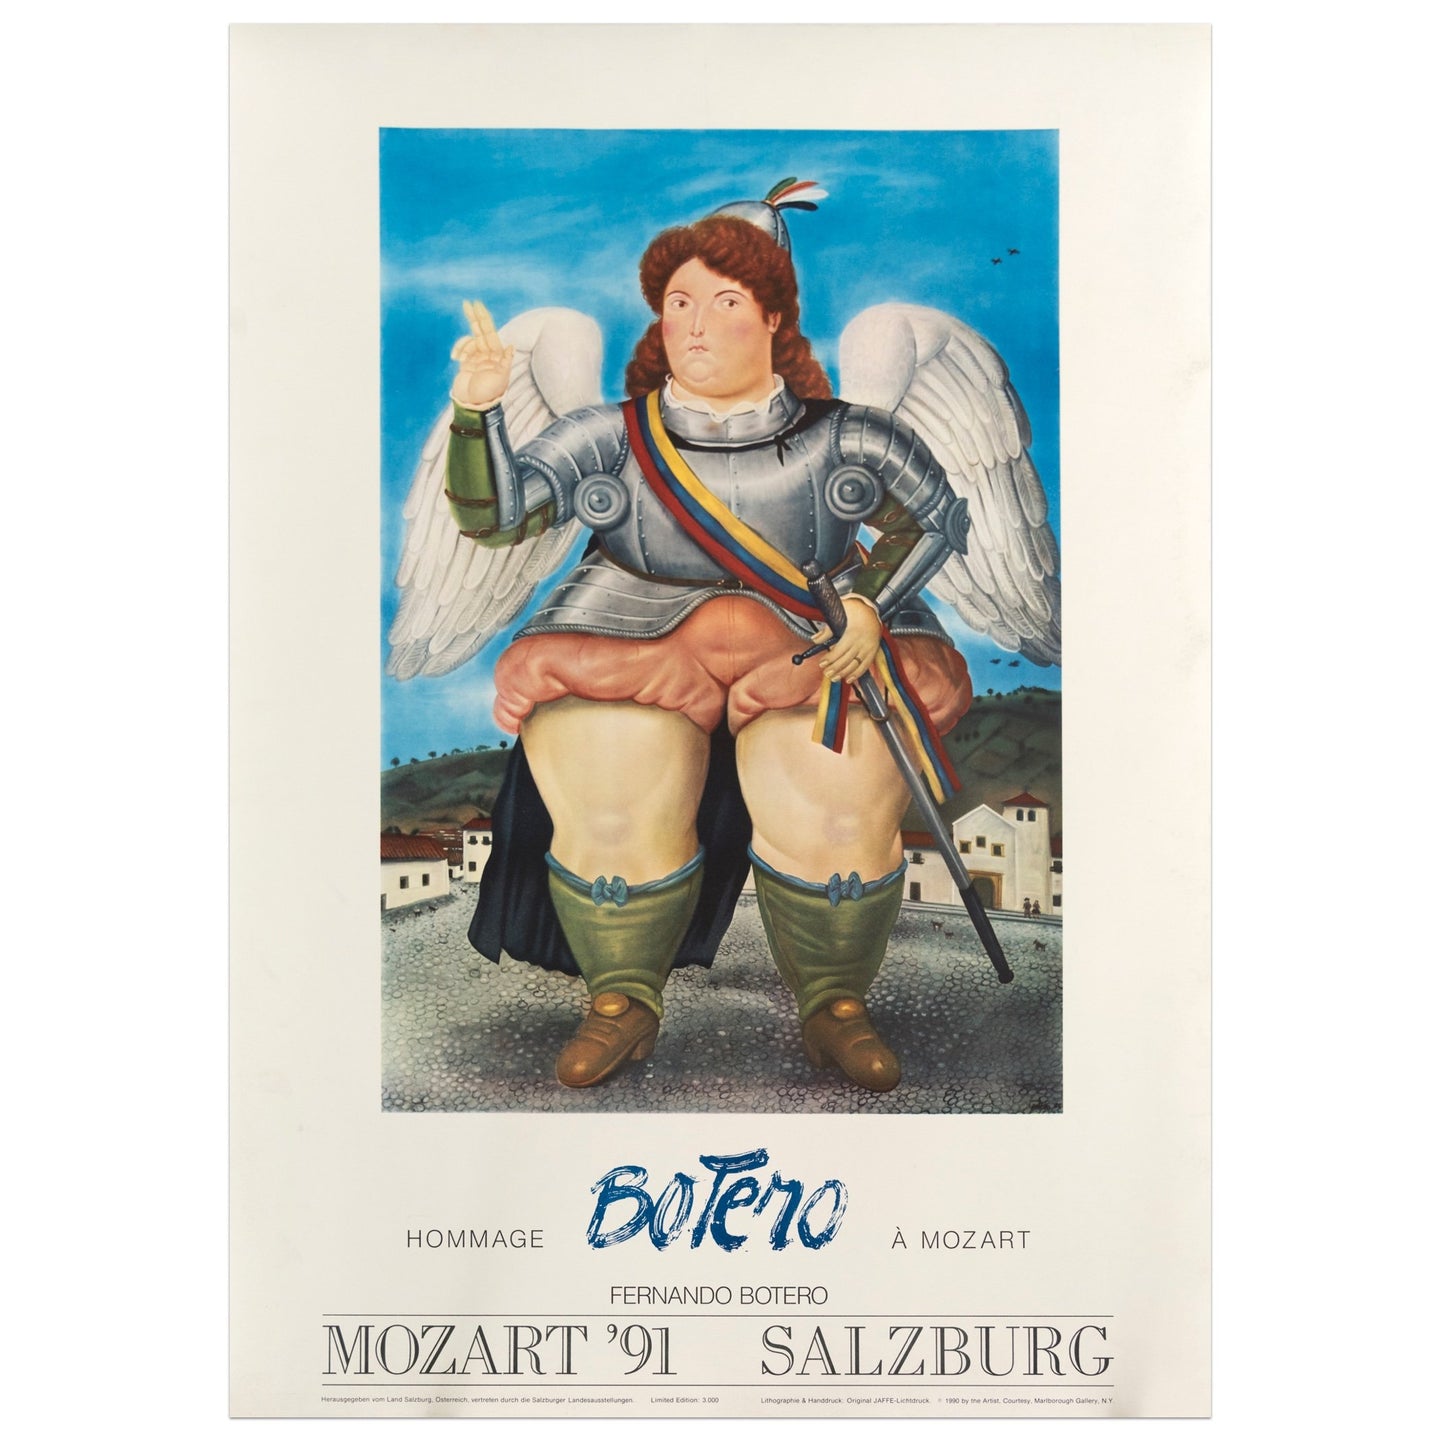 1991 Fernando Botero poster for a hommage to Mozart; featuring a Colombian woman dressed in armor, wings, and holding a sword outdoors